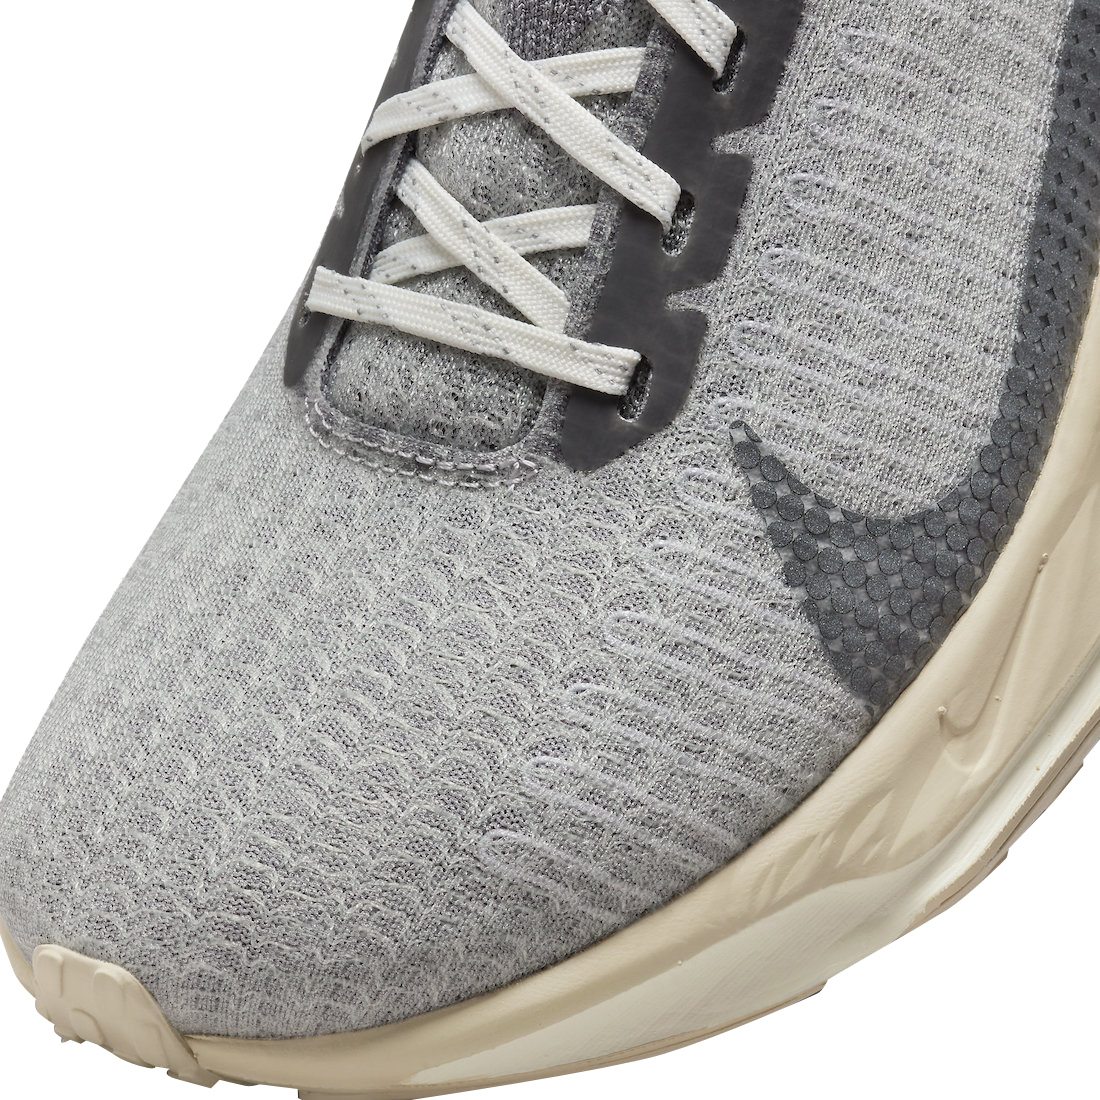 Nike Invincible 3 Cool Grey / Pewter / Iron Grey / Black Running Shoes -  Sneak in Peace